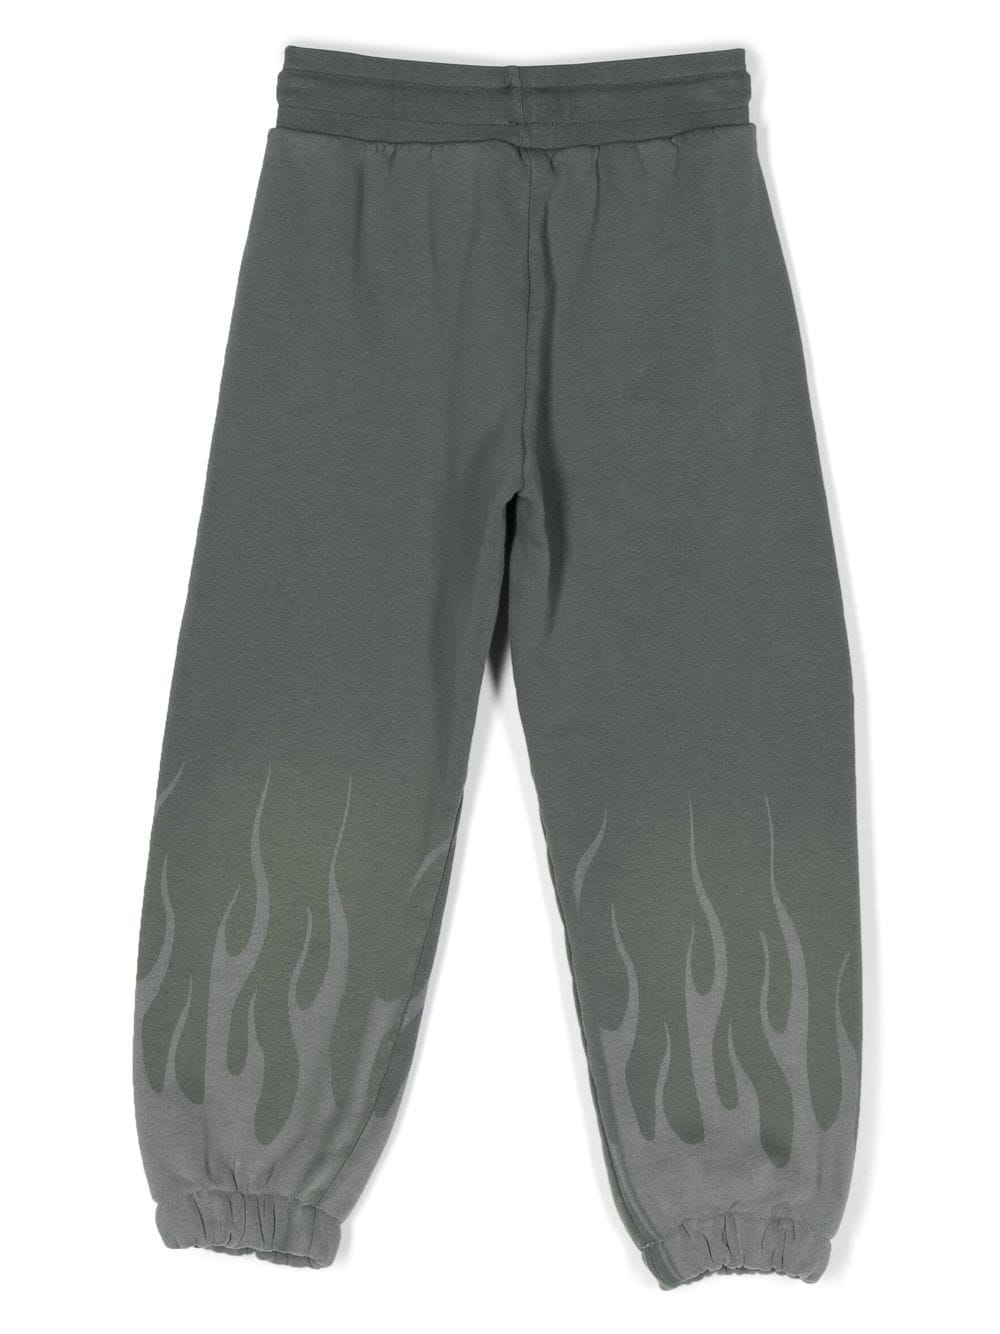 BALSAM GREEN PANTS WITH CORROSIVE FLAMES